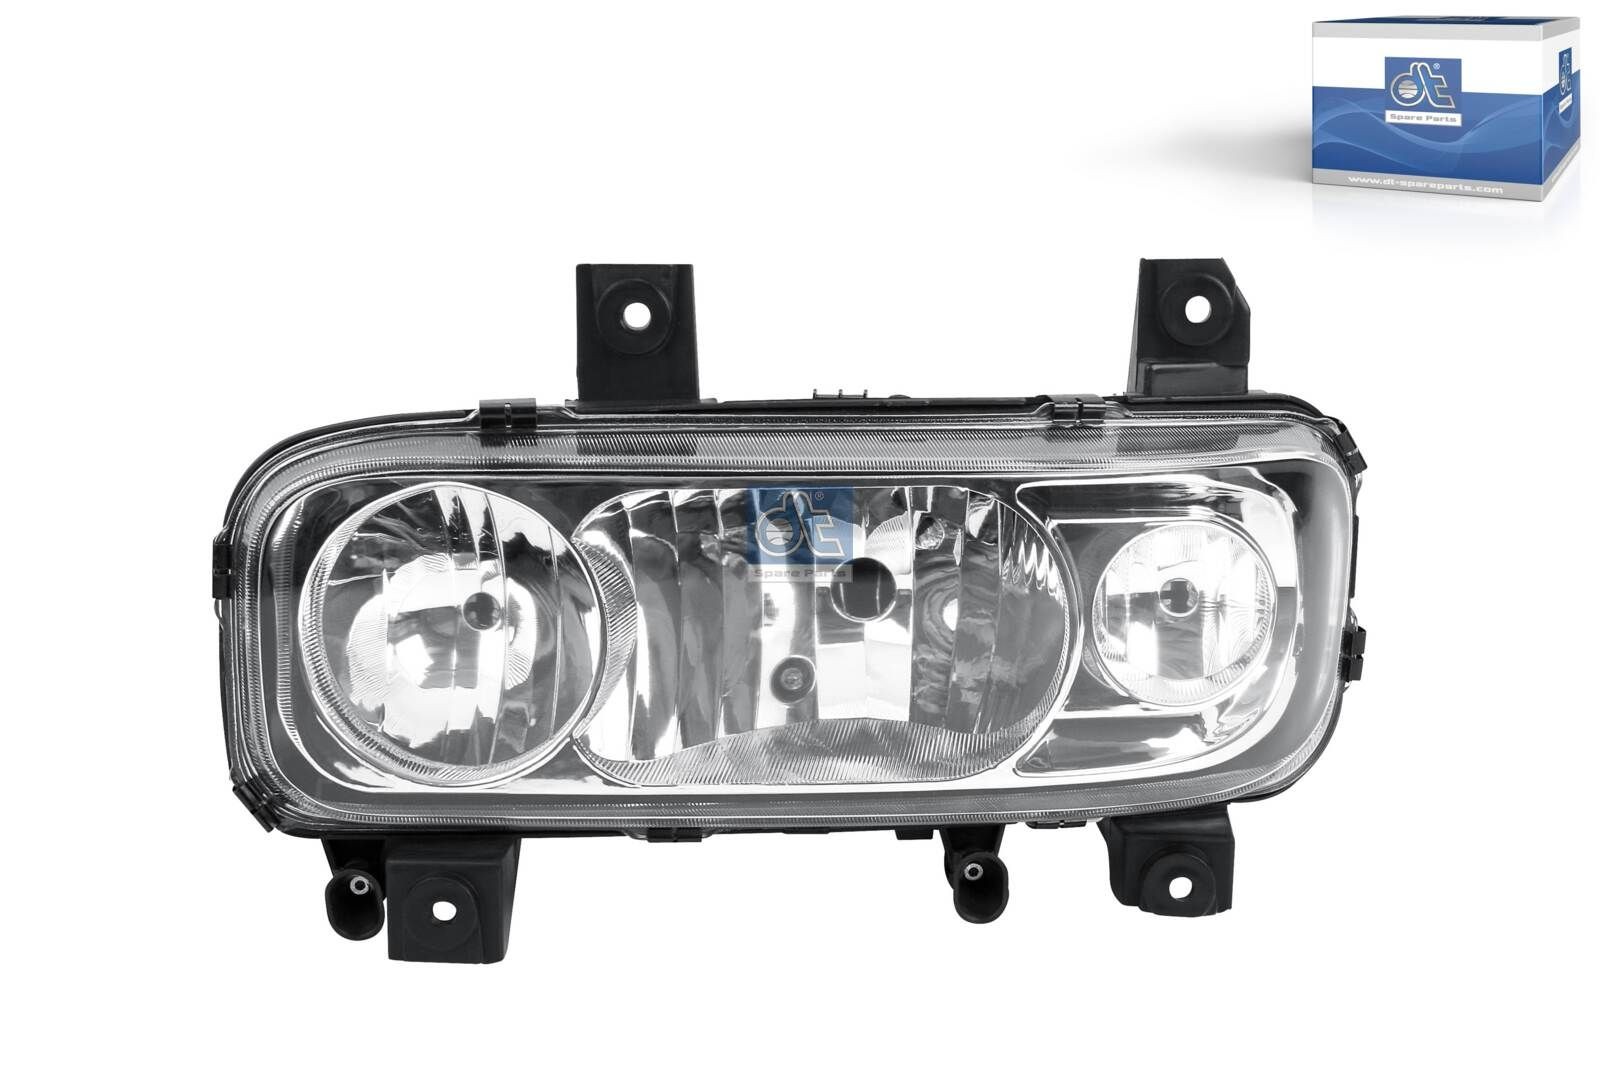 DT Spare Parts 4.64448 Headlight A973 820 2661